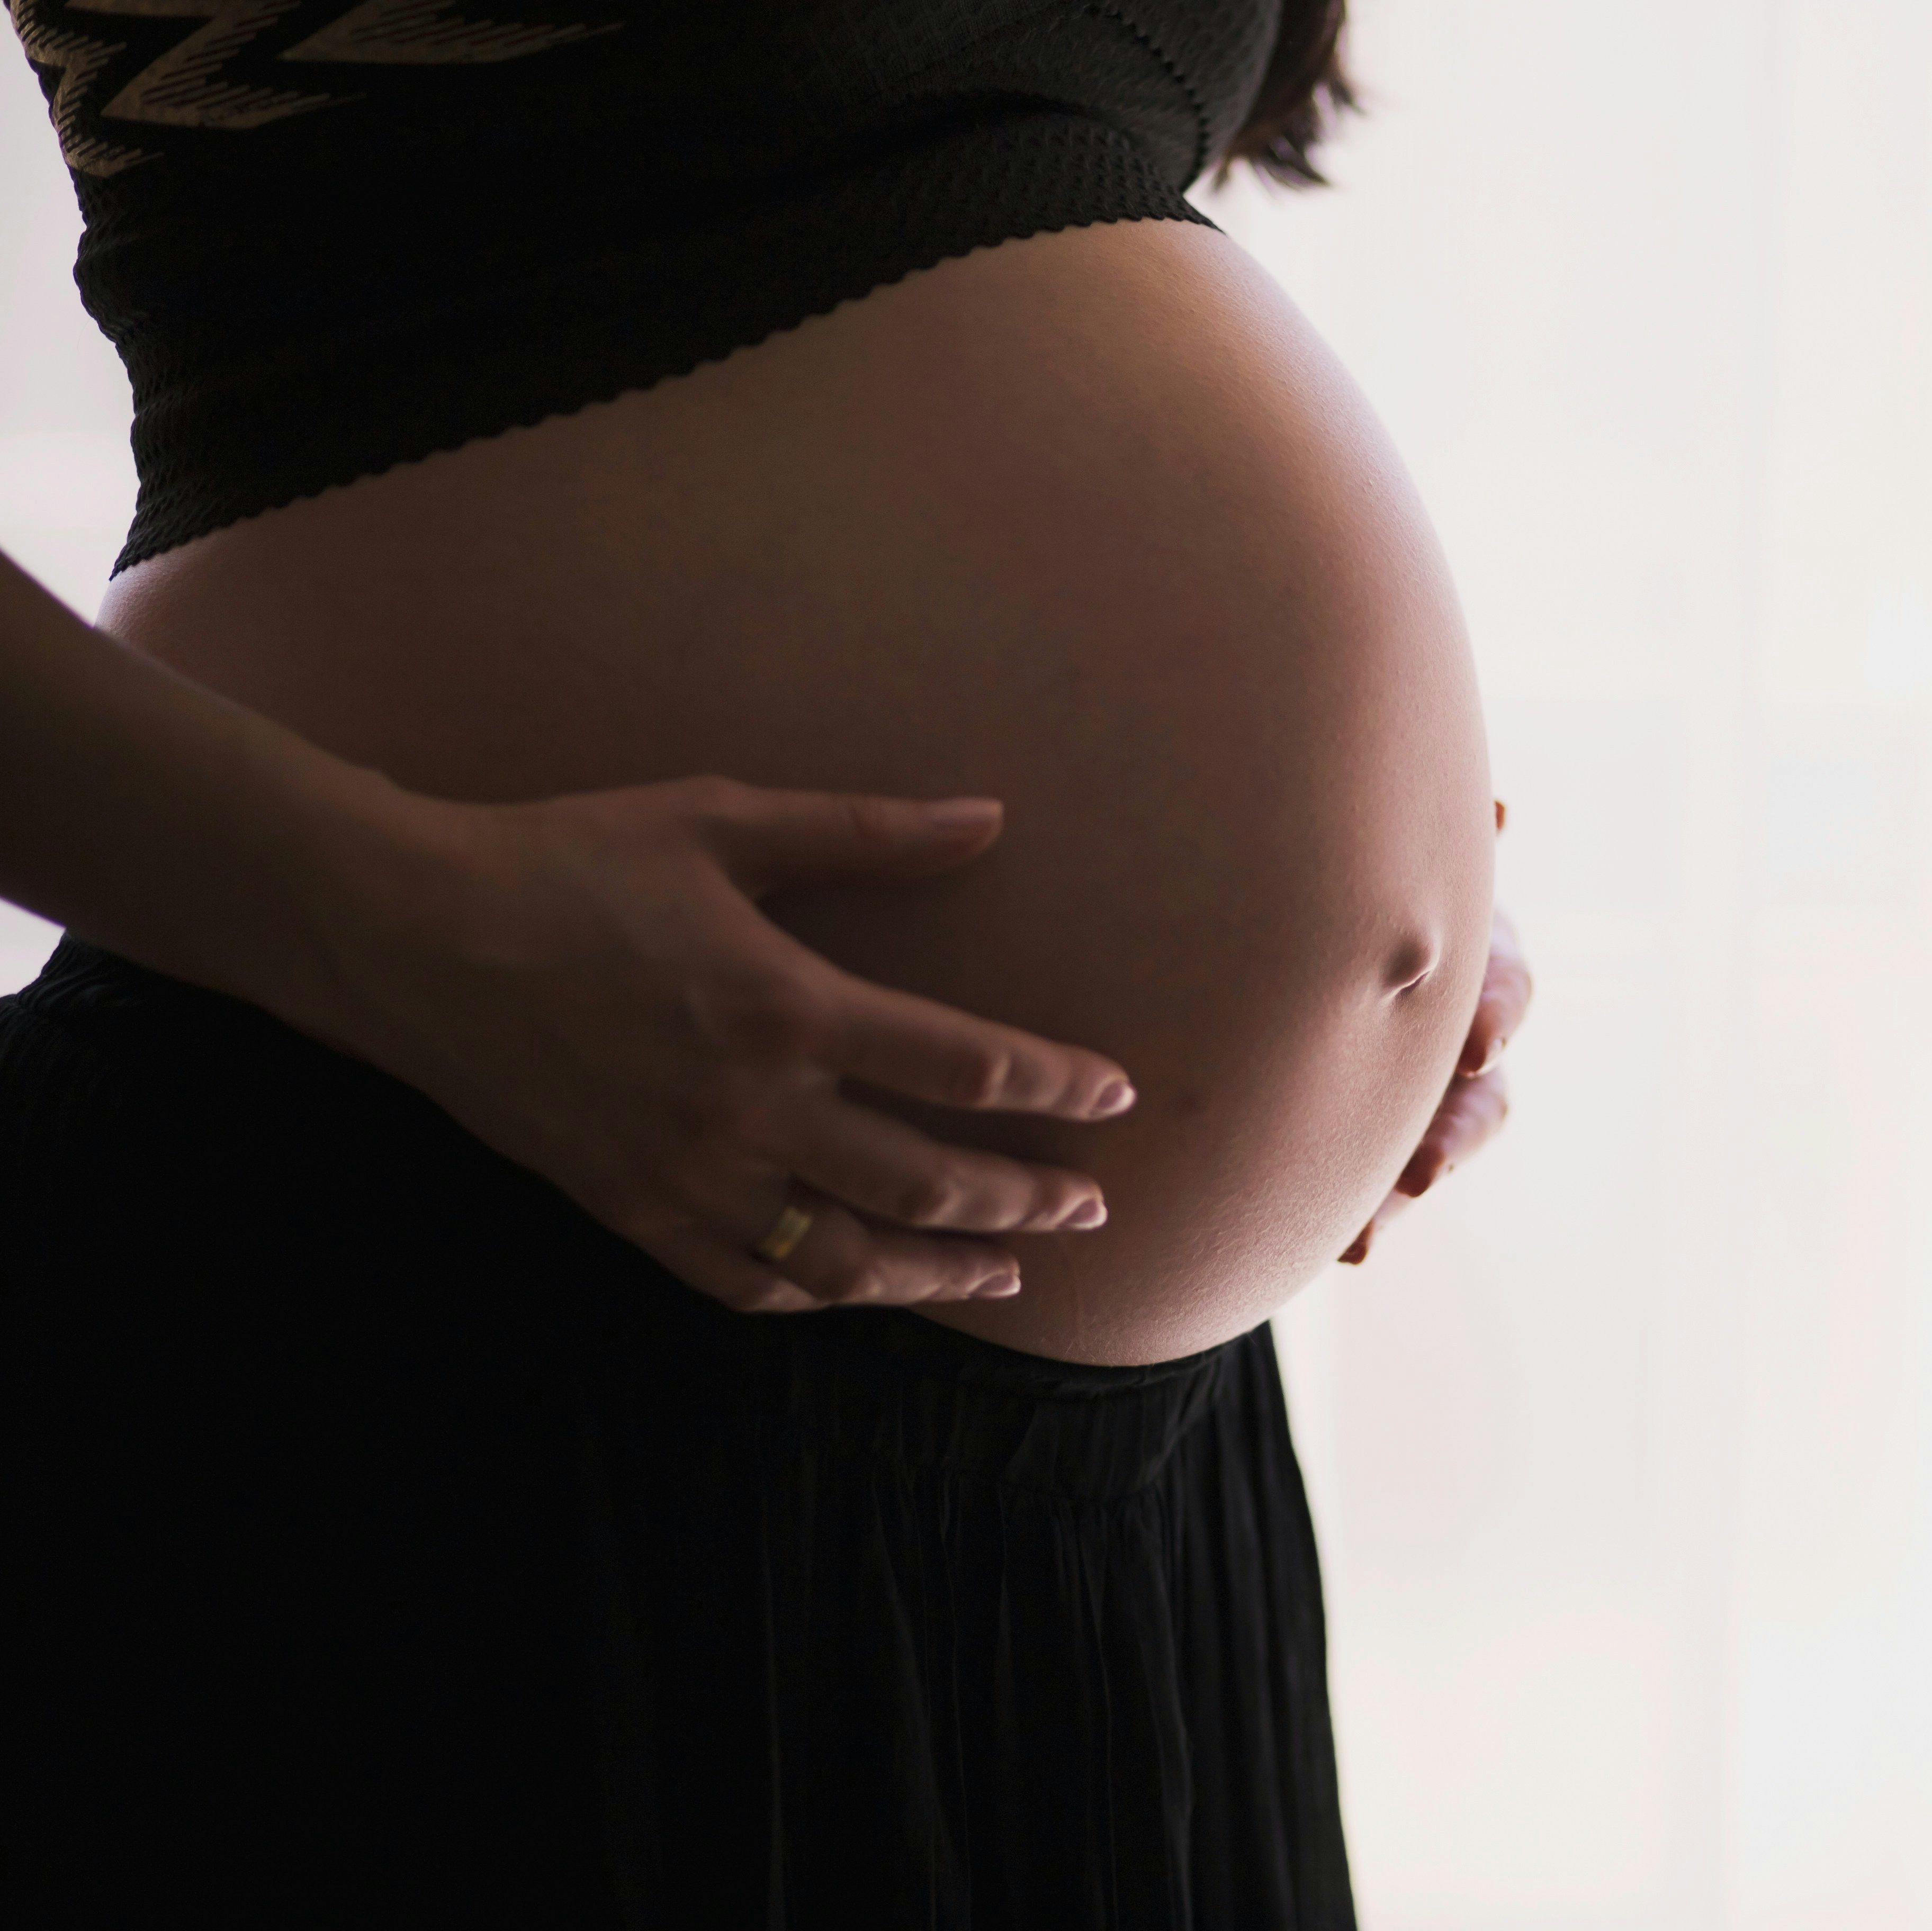 Metformin during pregnancy not linked to adverse birth outcomes